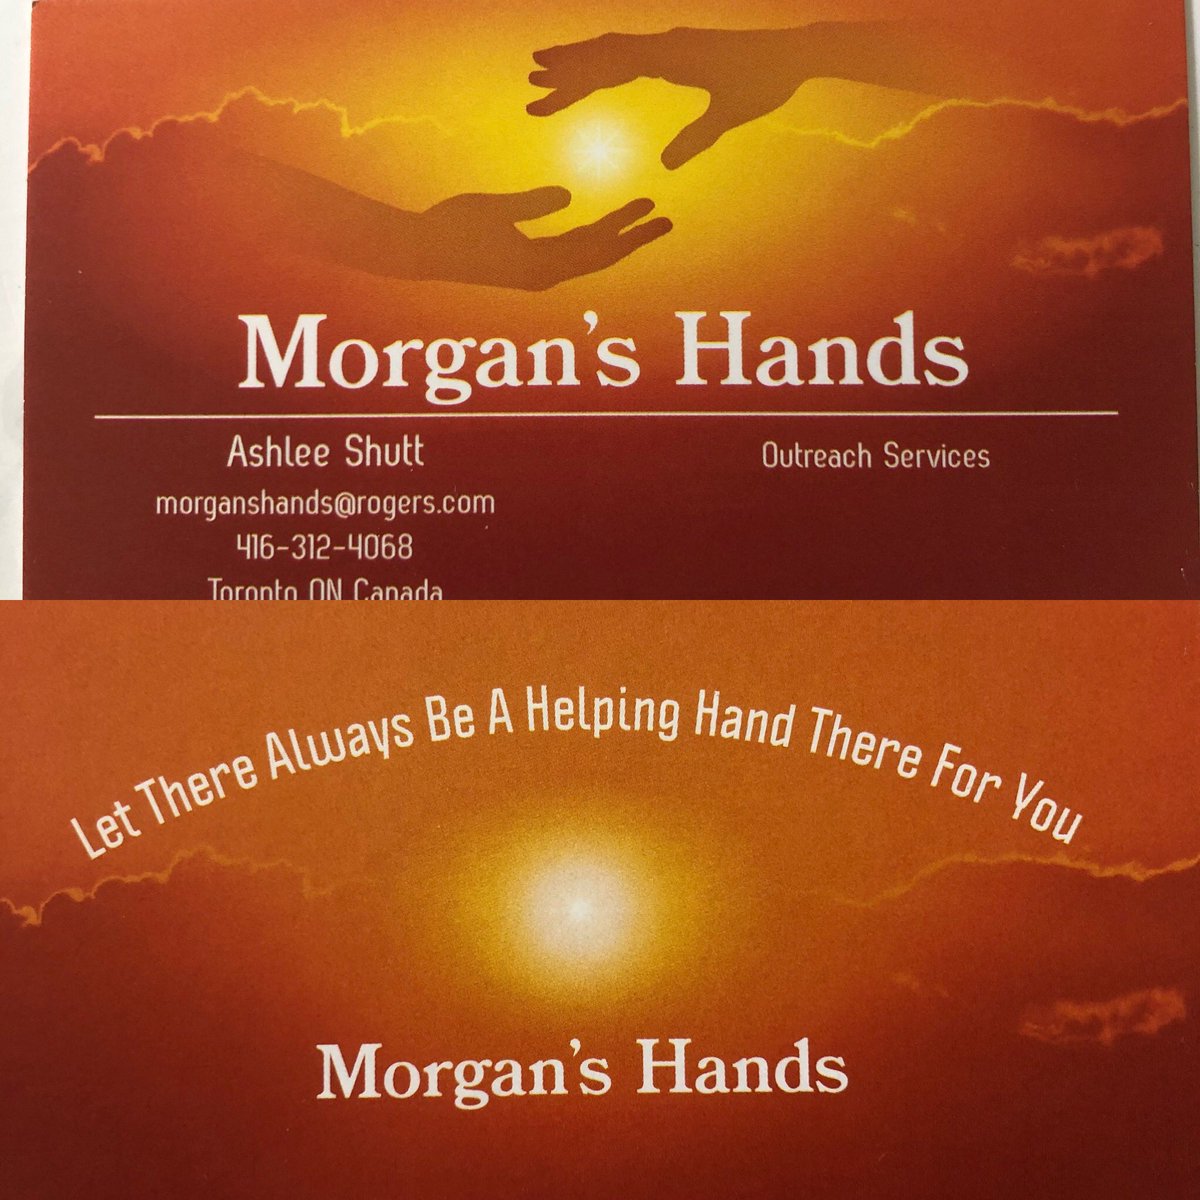 Help the vulnerable living on the streets of Toronto 

#supportmorganshands #morganshands #supportthehomeless #helpthevulnerable #homeless #lovehomeless #nonprofit #torontononprofit #hygienekits #nonprofits #KindnessMatters #donatenow #pleaseshare #pleasehelp